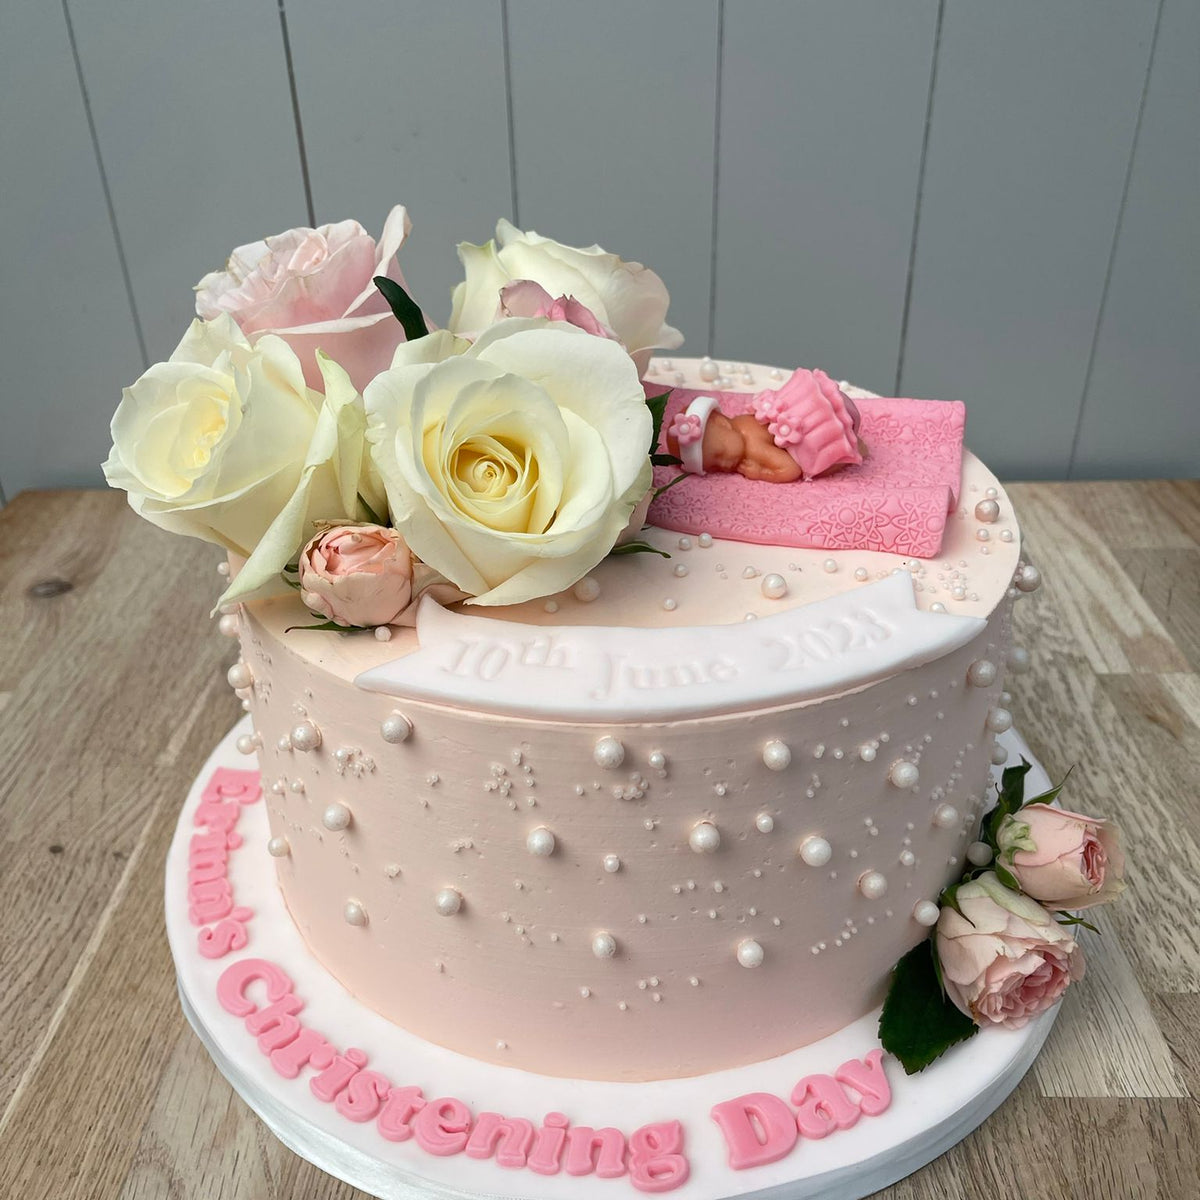 Traditional Christening Cake - Grouts The Bakers